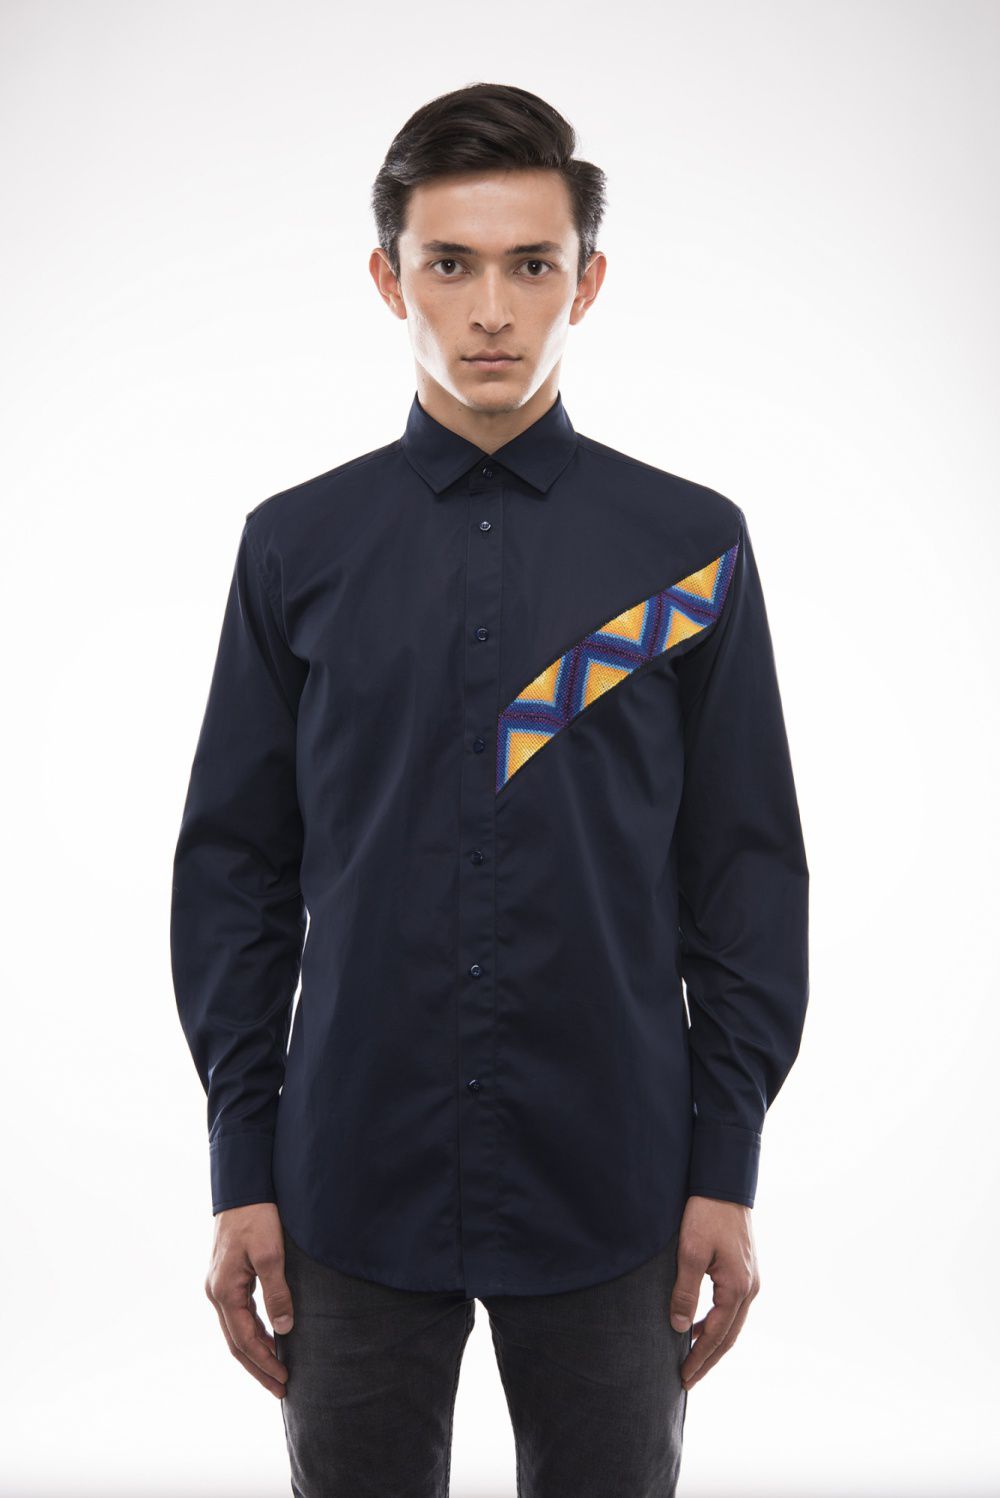 Embroidered Blue&Yelow shirt of MAKI HOMMES